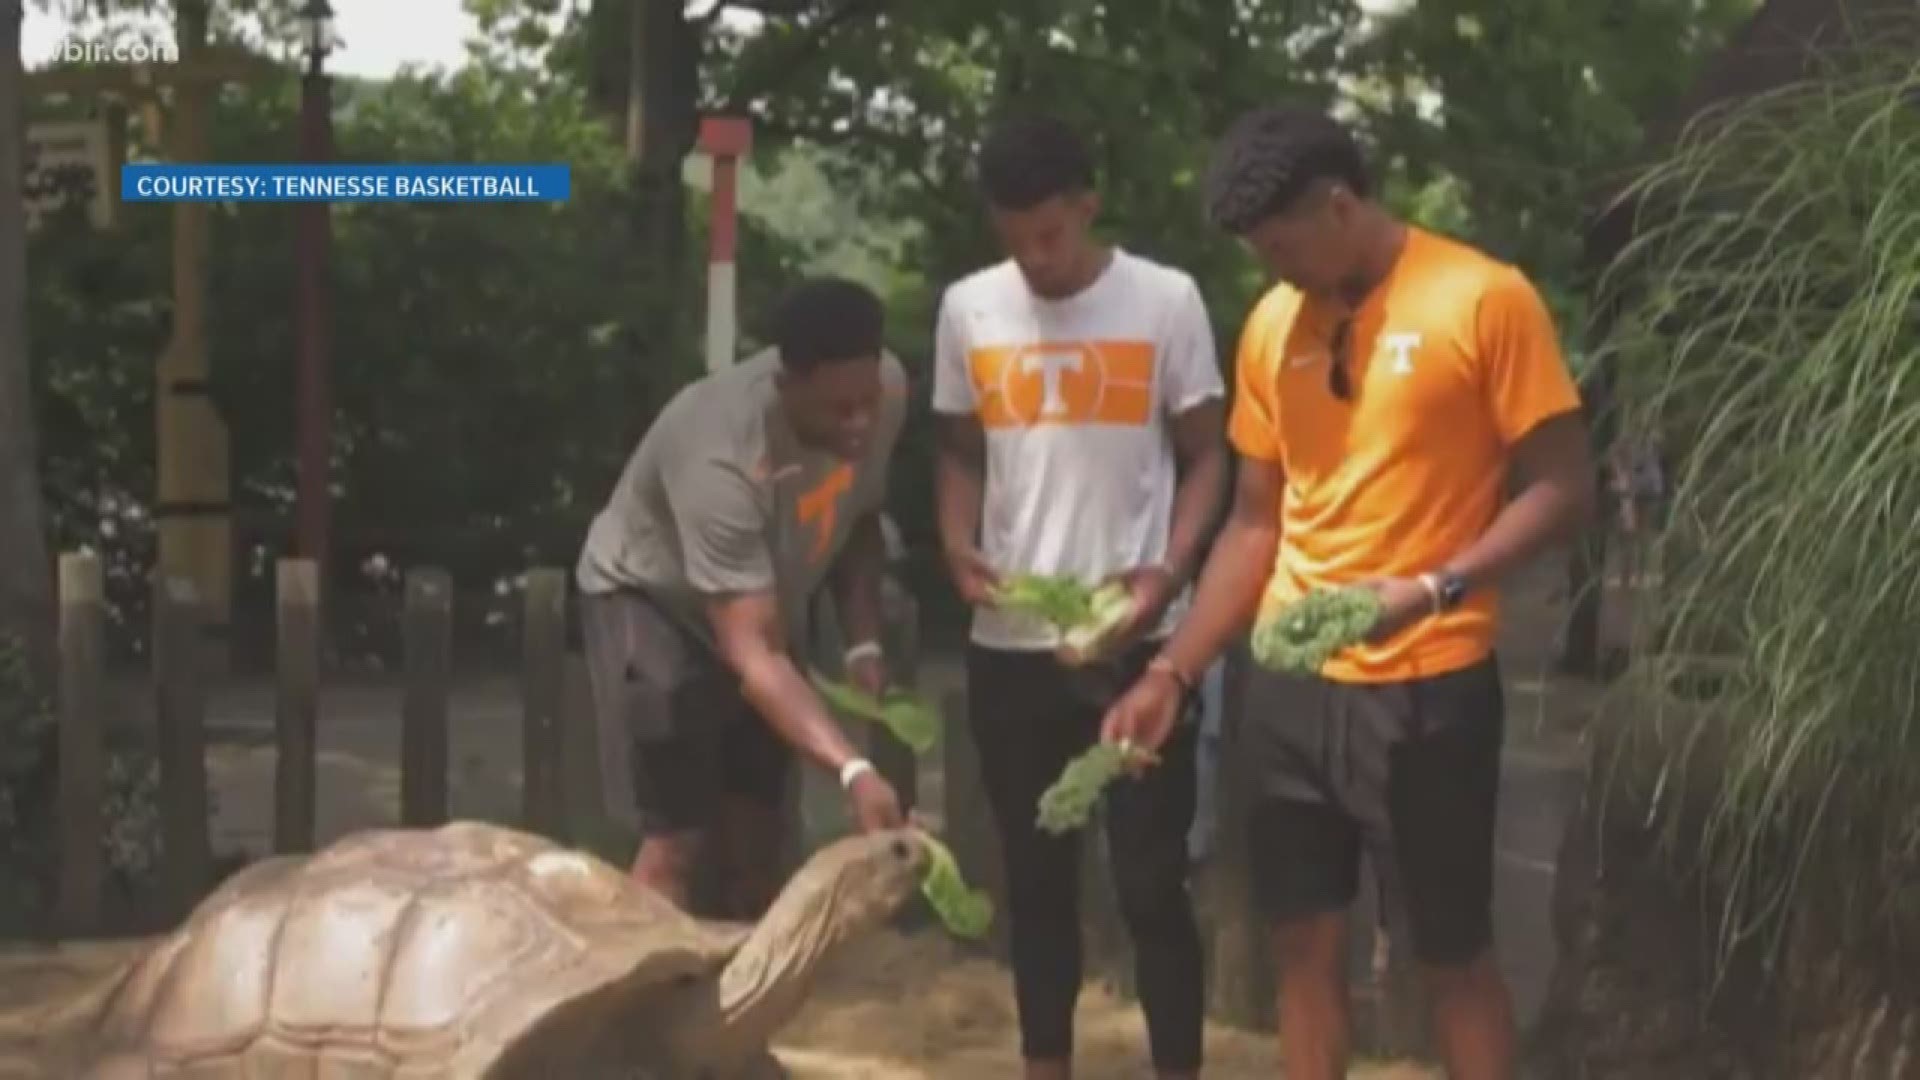 Vol hoops star Admiral Schofield admitted he didn't realize Knoxville had a zoo... until they invited the team out for a tour.